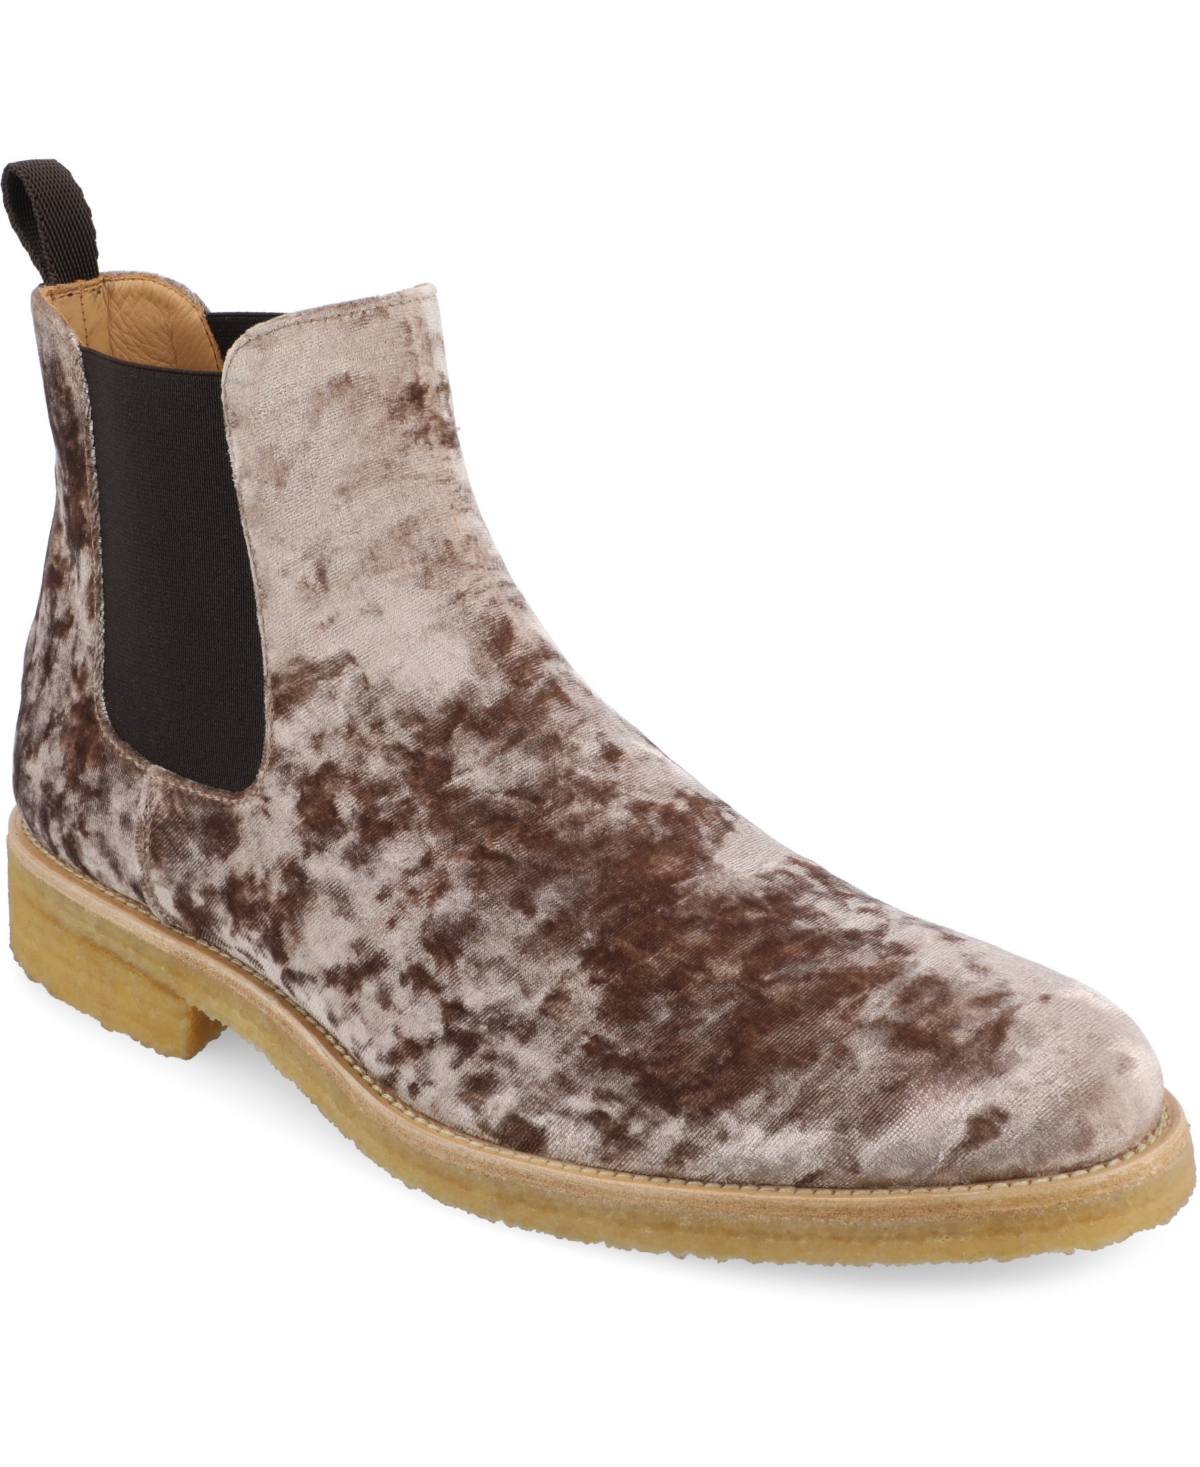 Men's The Jude Chelsea Boot - Champagne